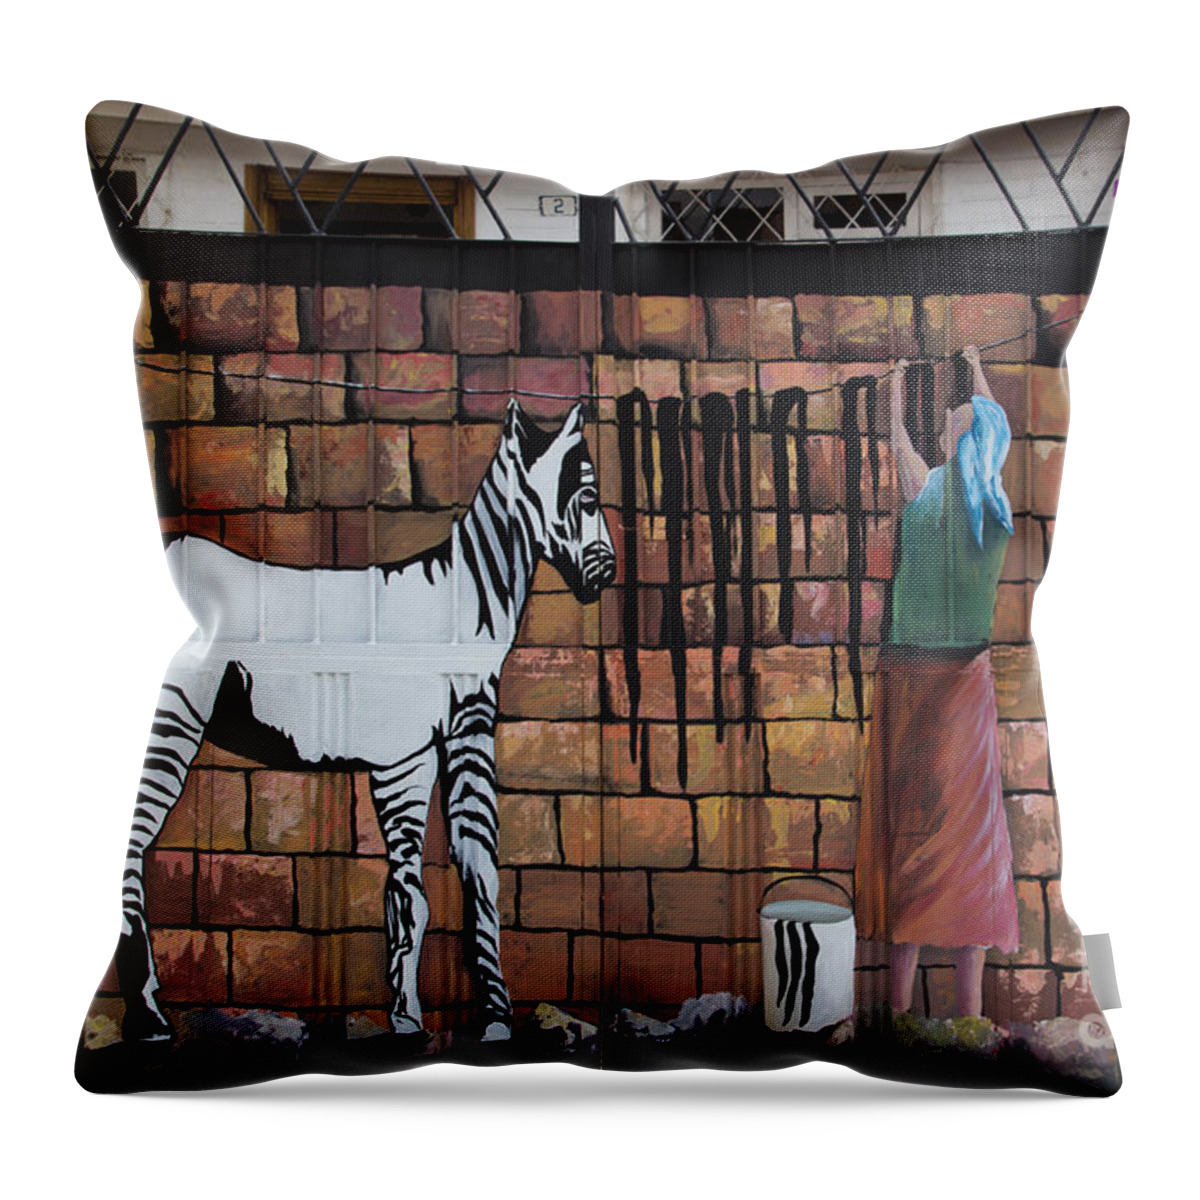 Wash Throw Pillow featuring the photograph Wash Day For Zebras by Al Bourassa